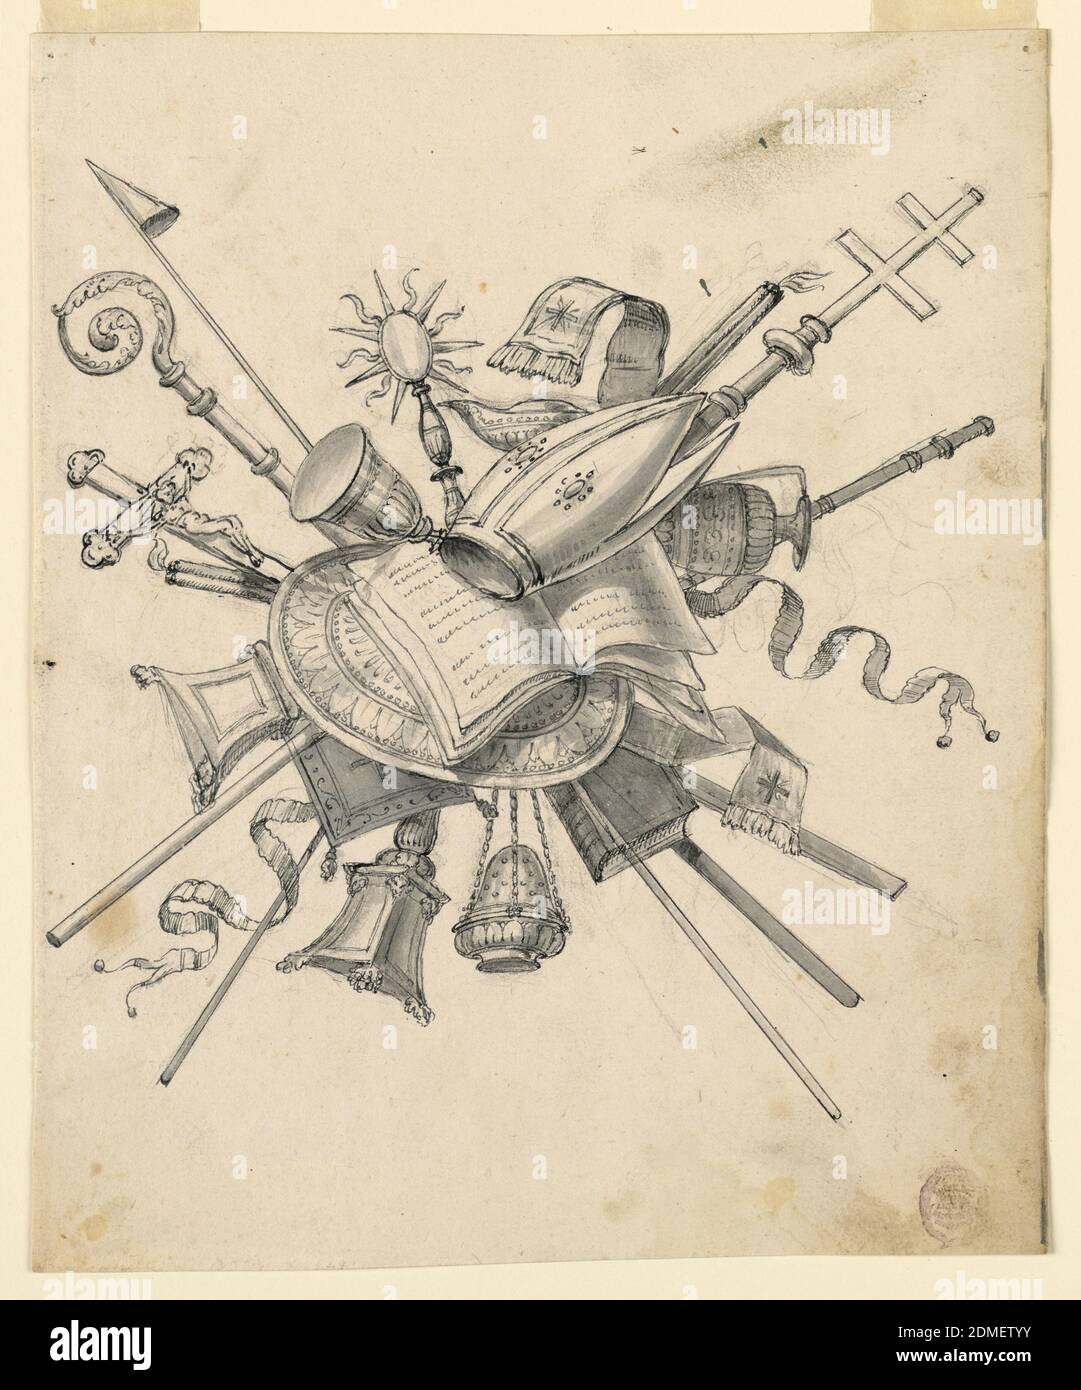 Trophy with Ecclesiastical Objects, Romolo Achille Liverani, Italian, 1809 - 1872, Black crayon, pen and dark ink, brush and gray water color on paper, An assembly of a mitre, a prelate’s hat, a crozier, an archbishop’s cross, altar objects, and processional pennon., Italy, 1830–1850, ornament, Drawing Stock Photo